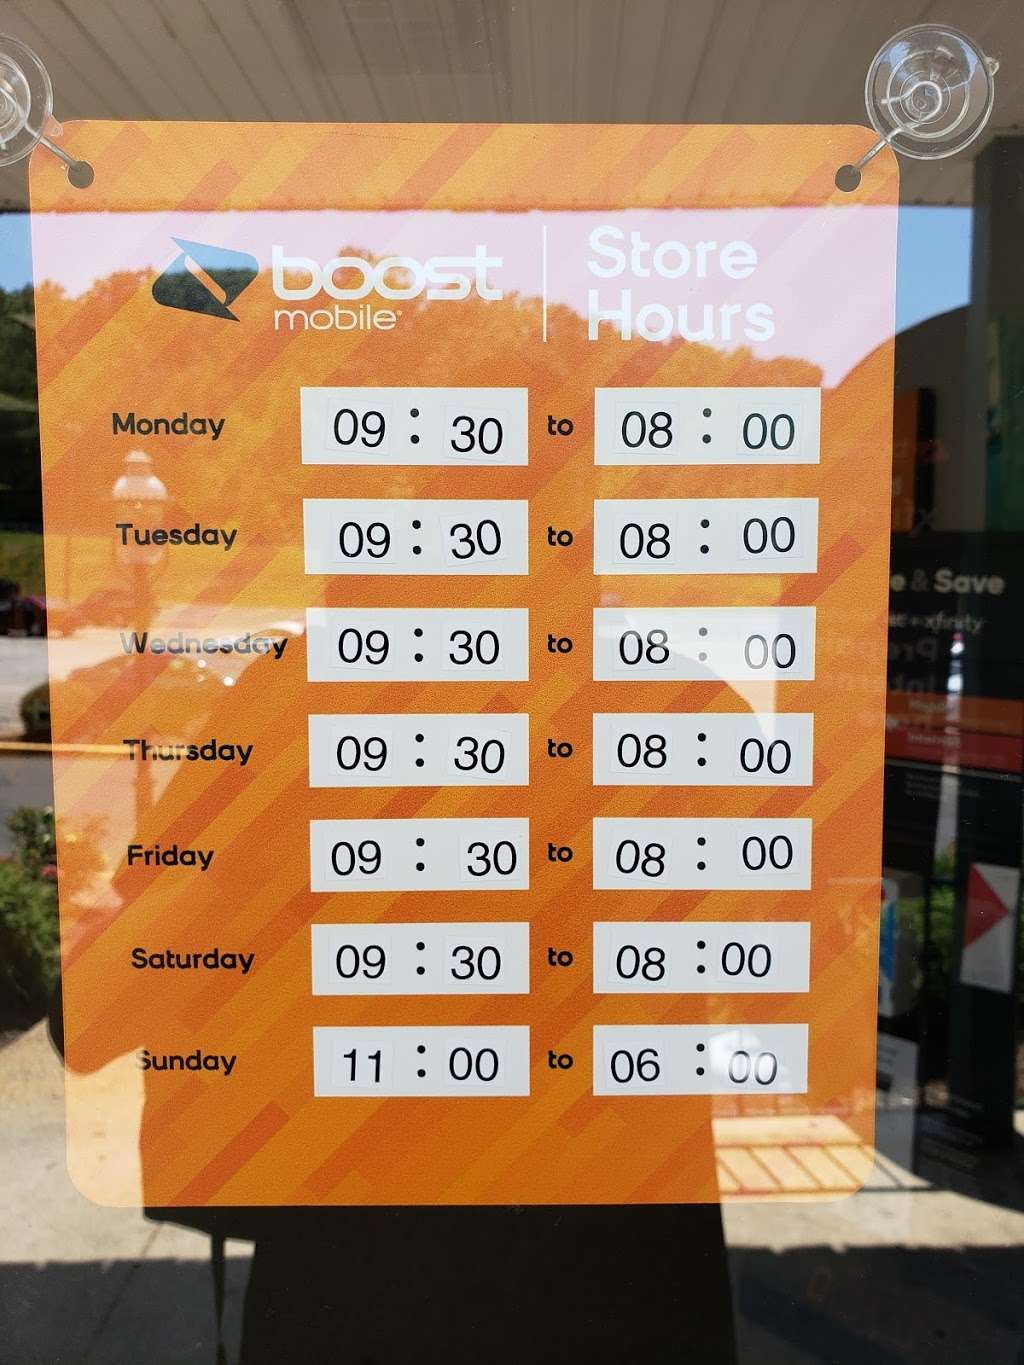 Boost Mobile | 18069 Triangle Shopping Plaza # A, Dumfries, VA 22026 | Phone: (571) 931-6164